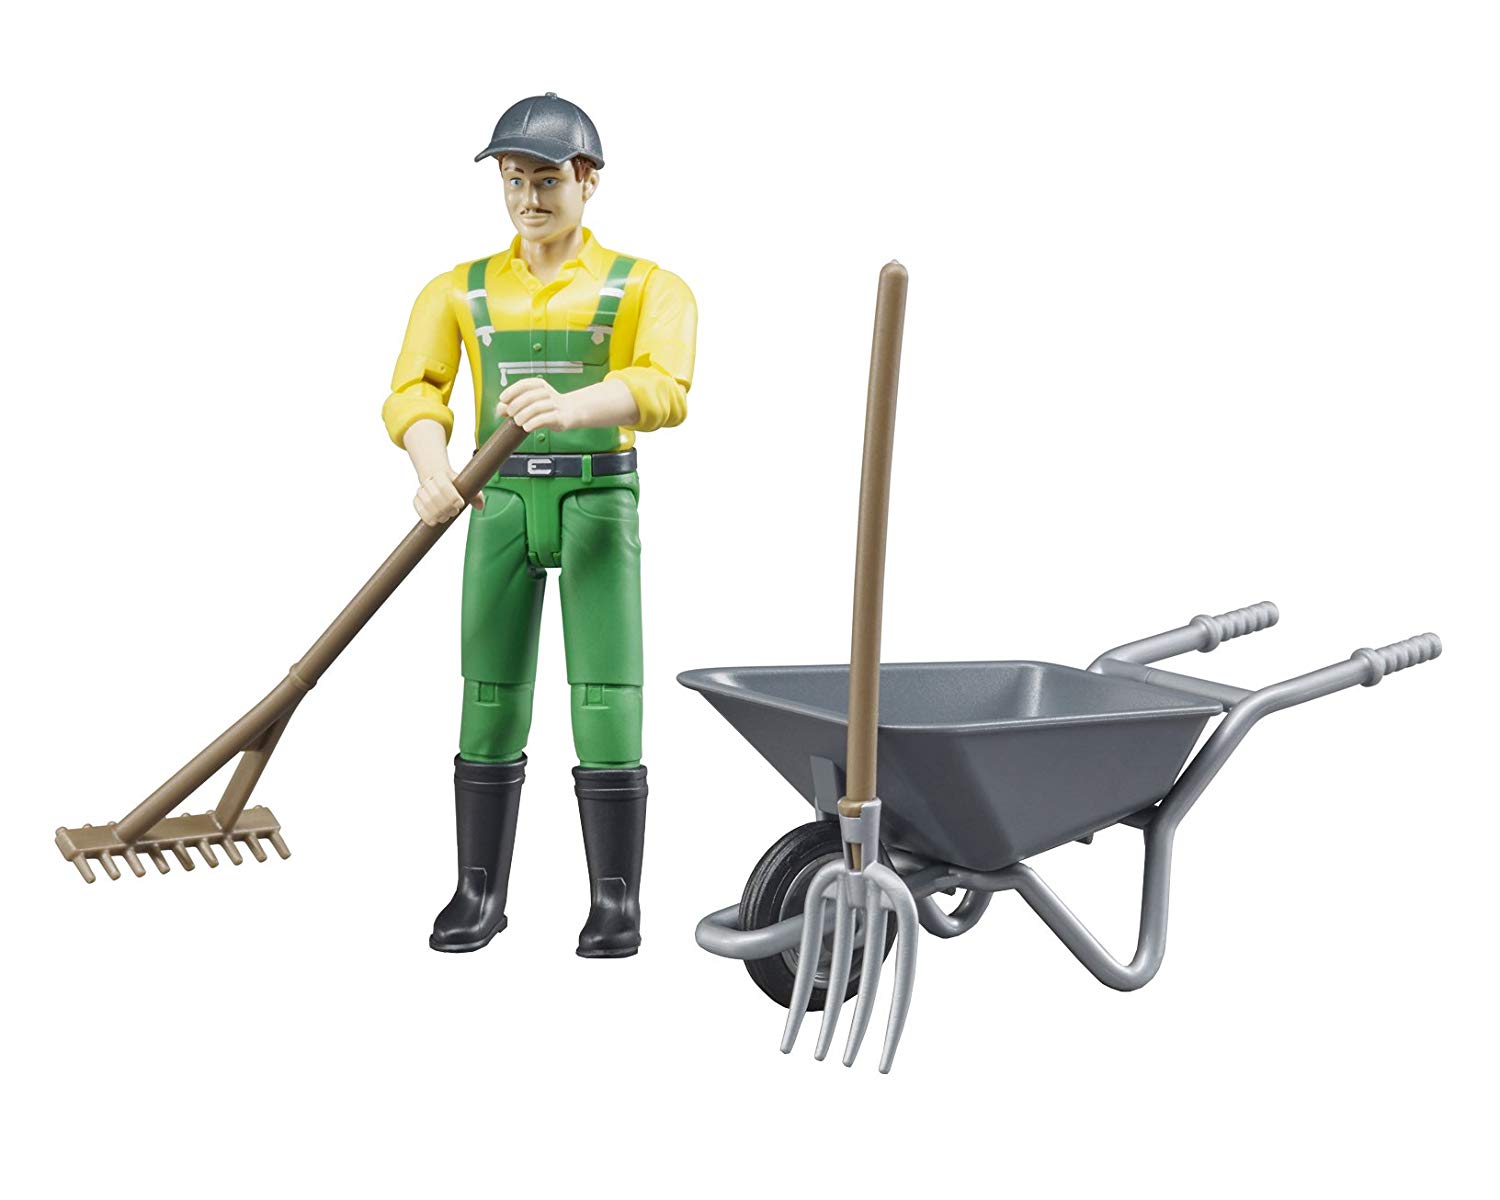 Bruder Farmer Figurines With Accessories